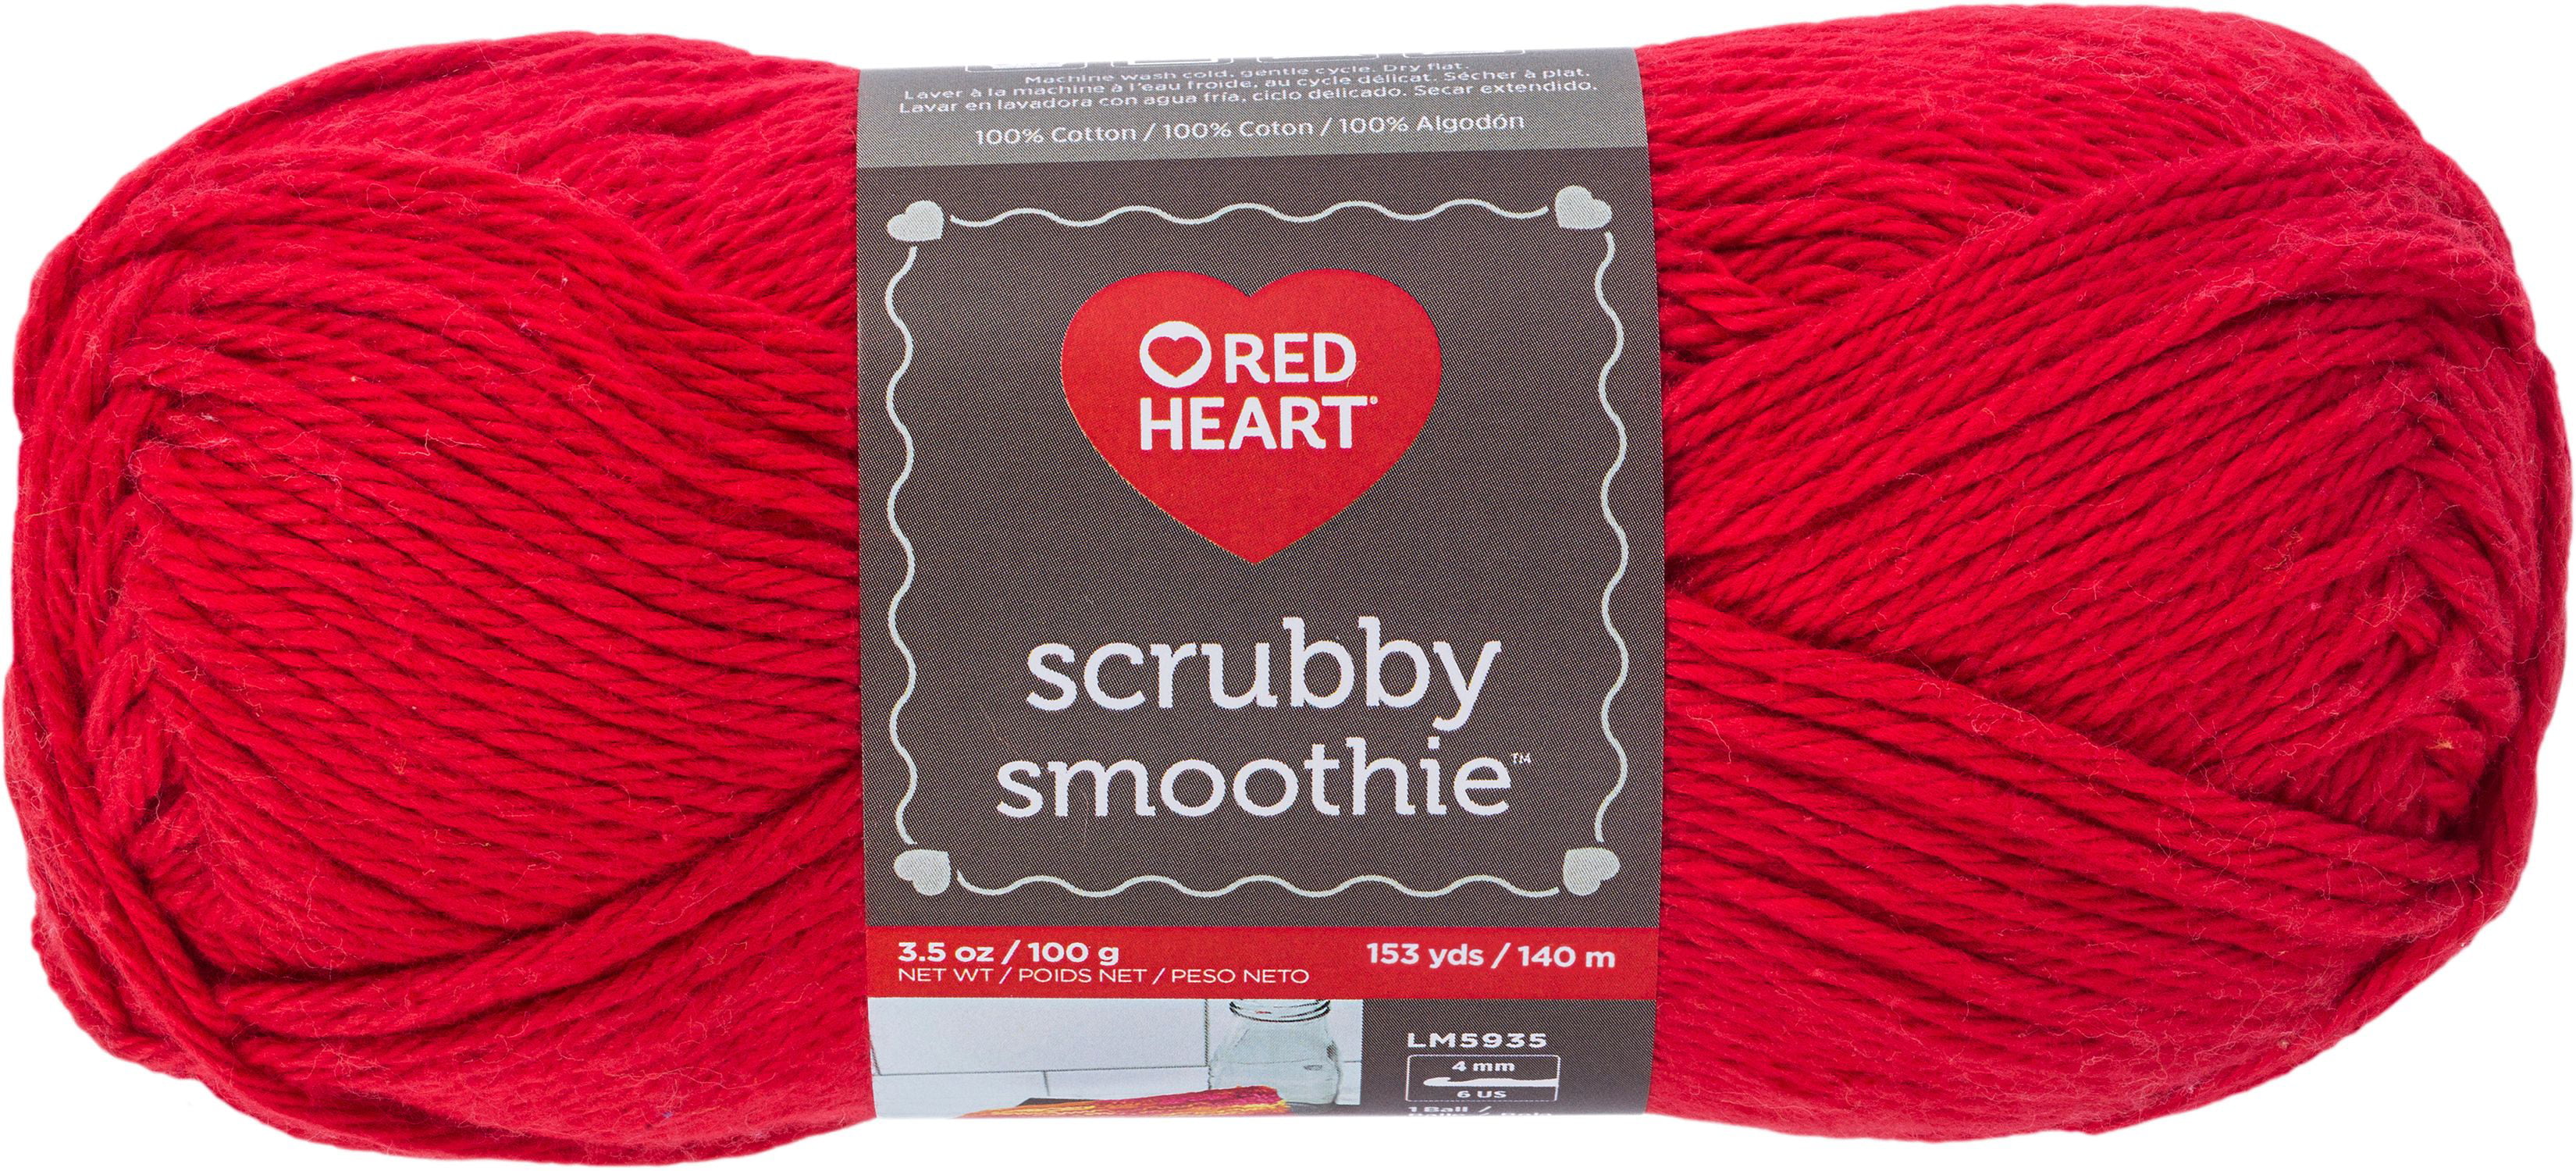 Yarn Love: Red Heart Scrubby Smoothie - moogly